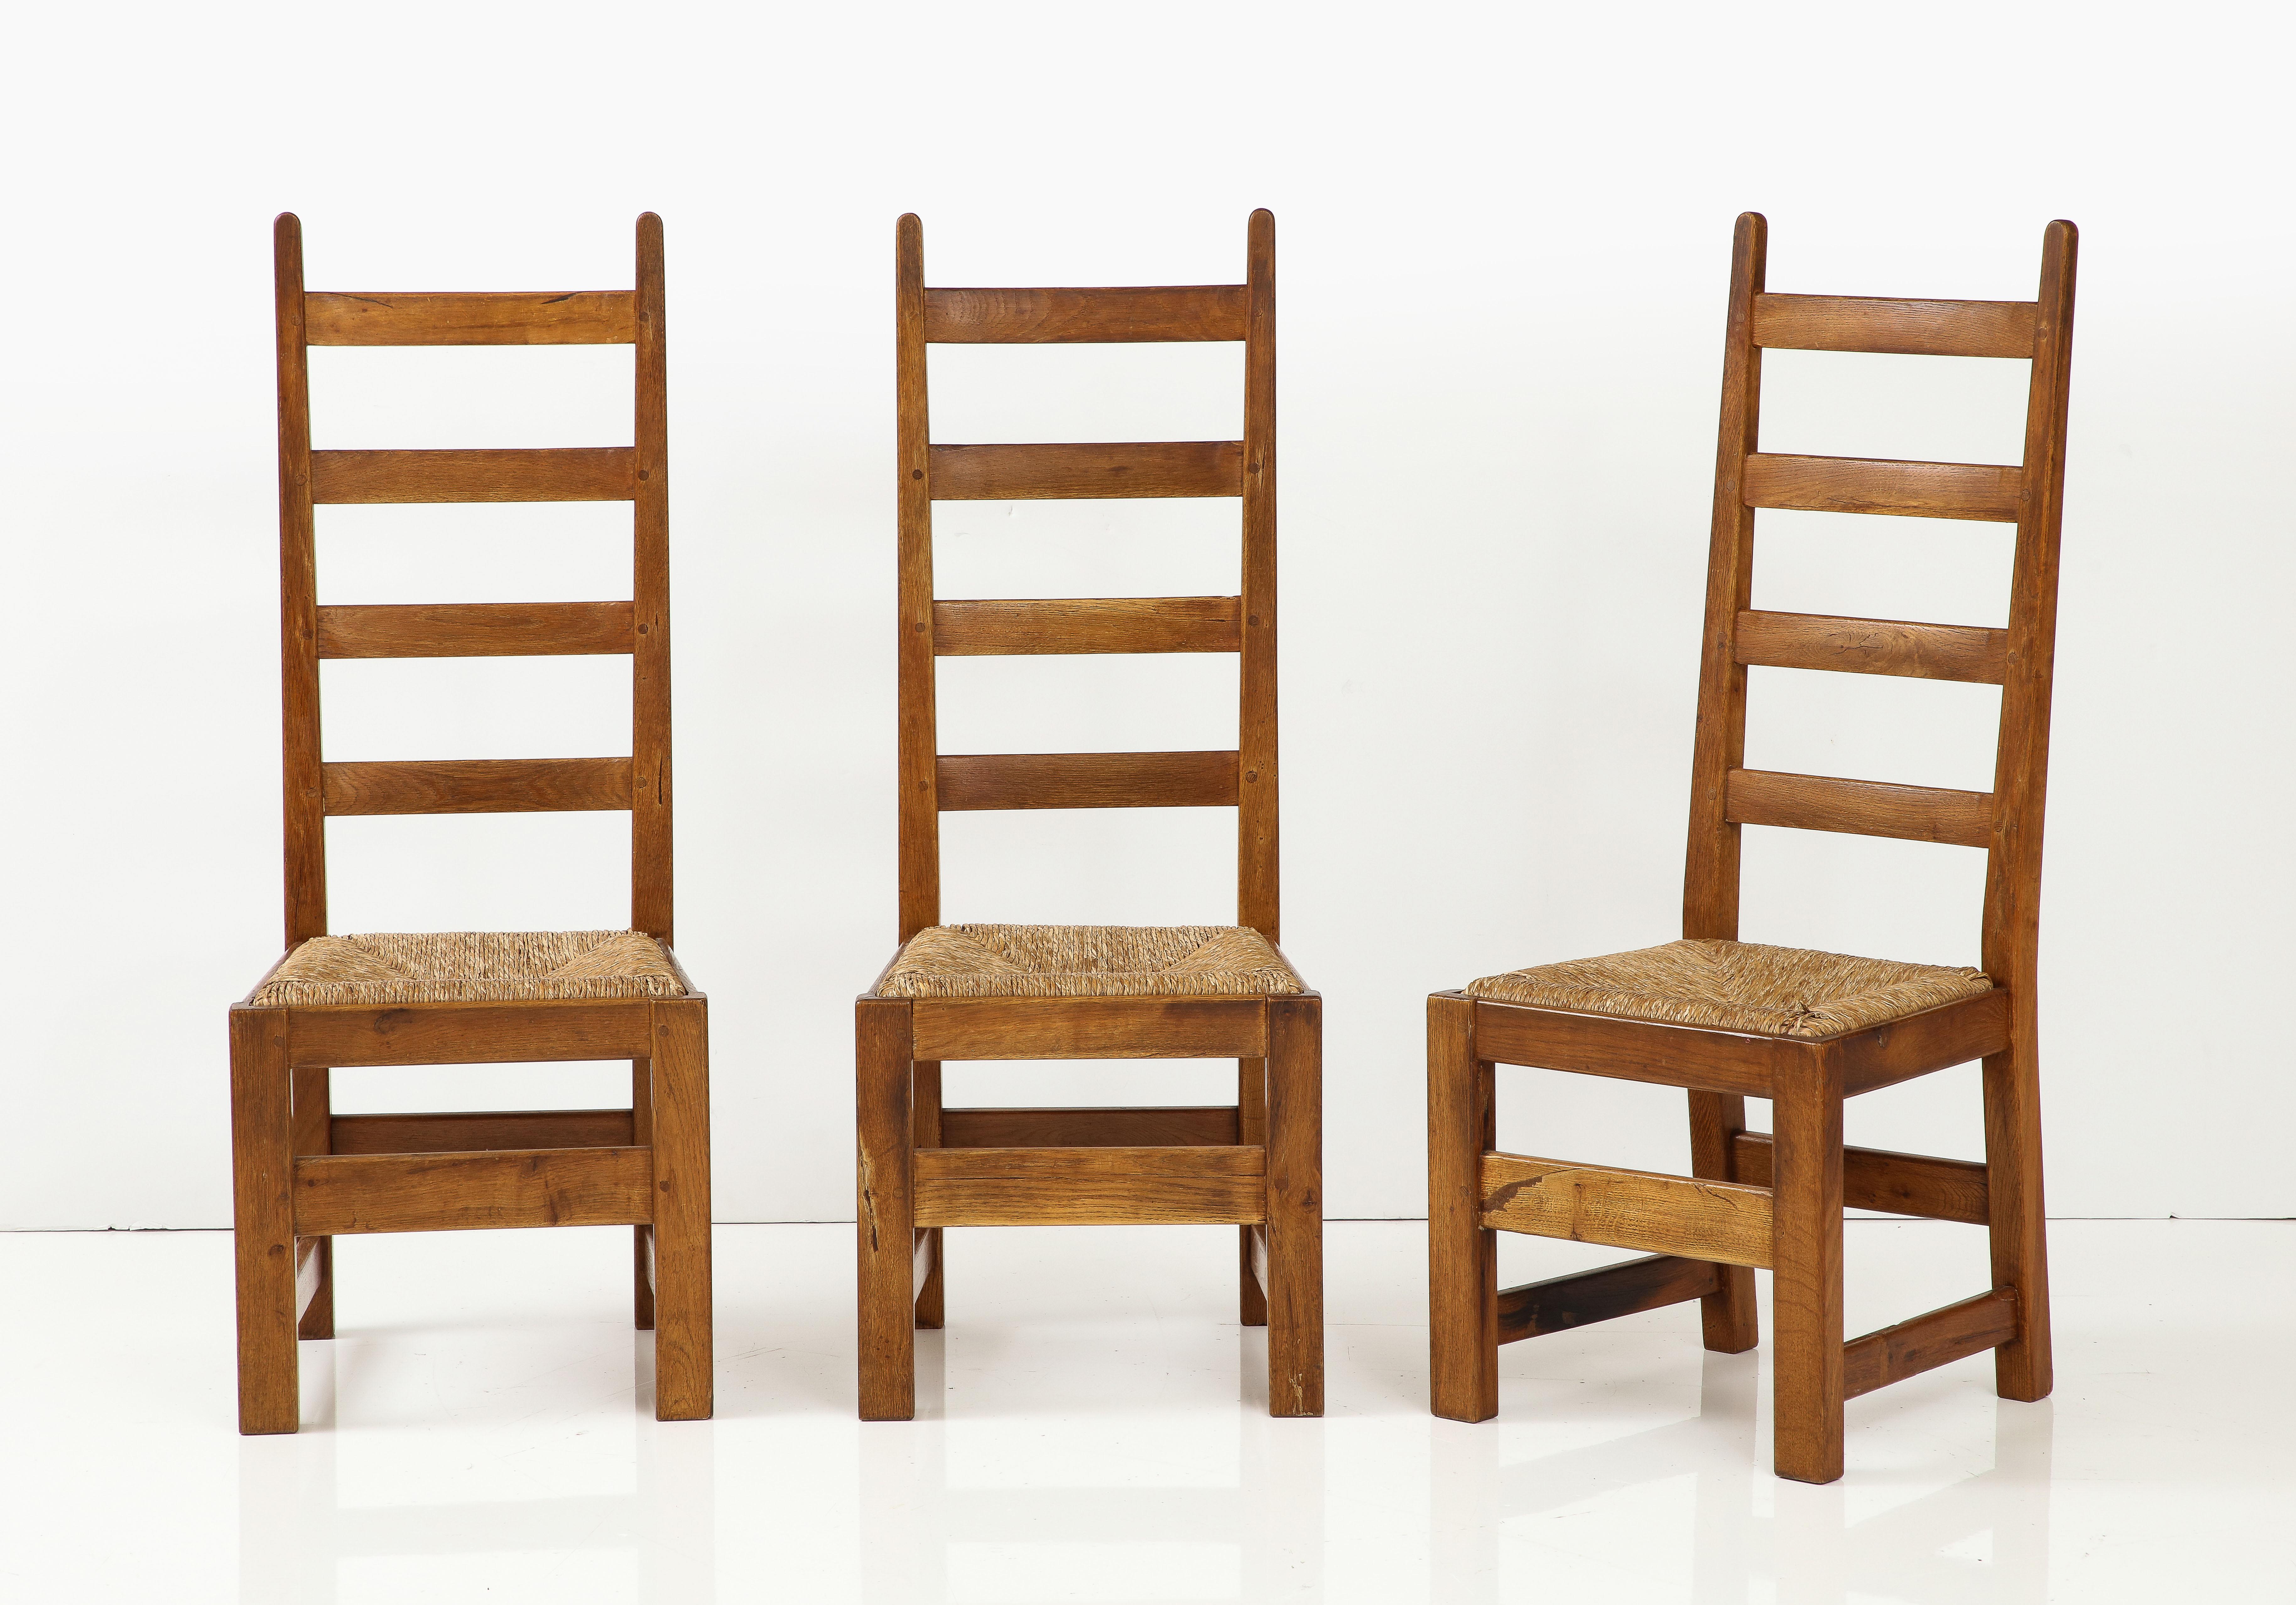 Set of Six French Oak & Rush Rustic Modern Chairs with High Backs, c. 1950, signed
Oak, Rush

Seat h: 17.75 in.
46 ¾ in. x 18 ½ in. x 17 in.